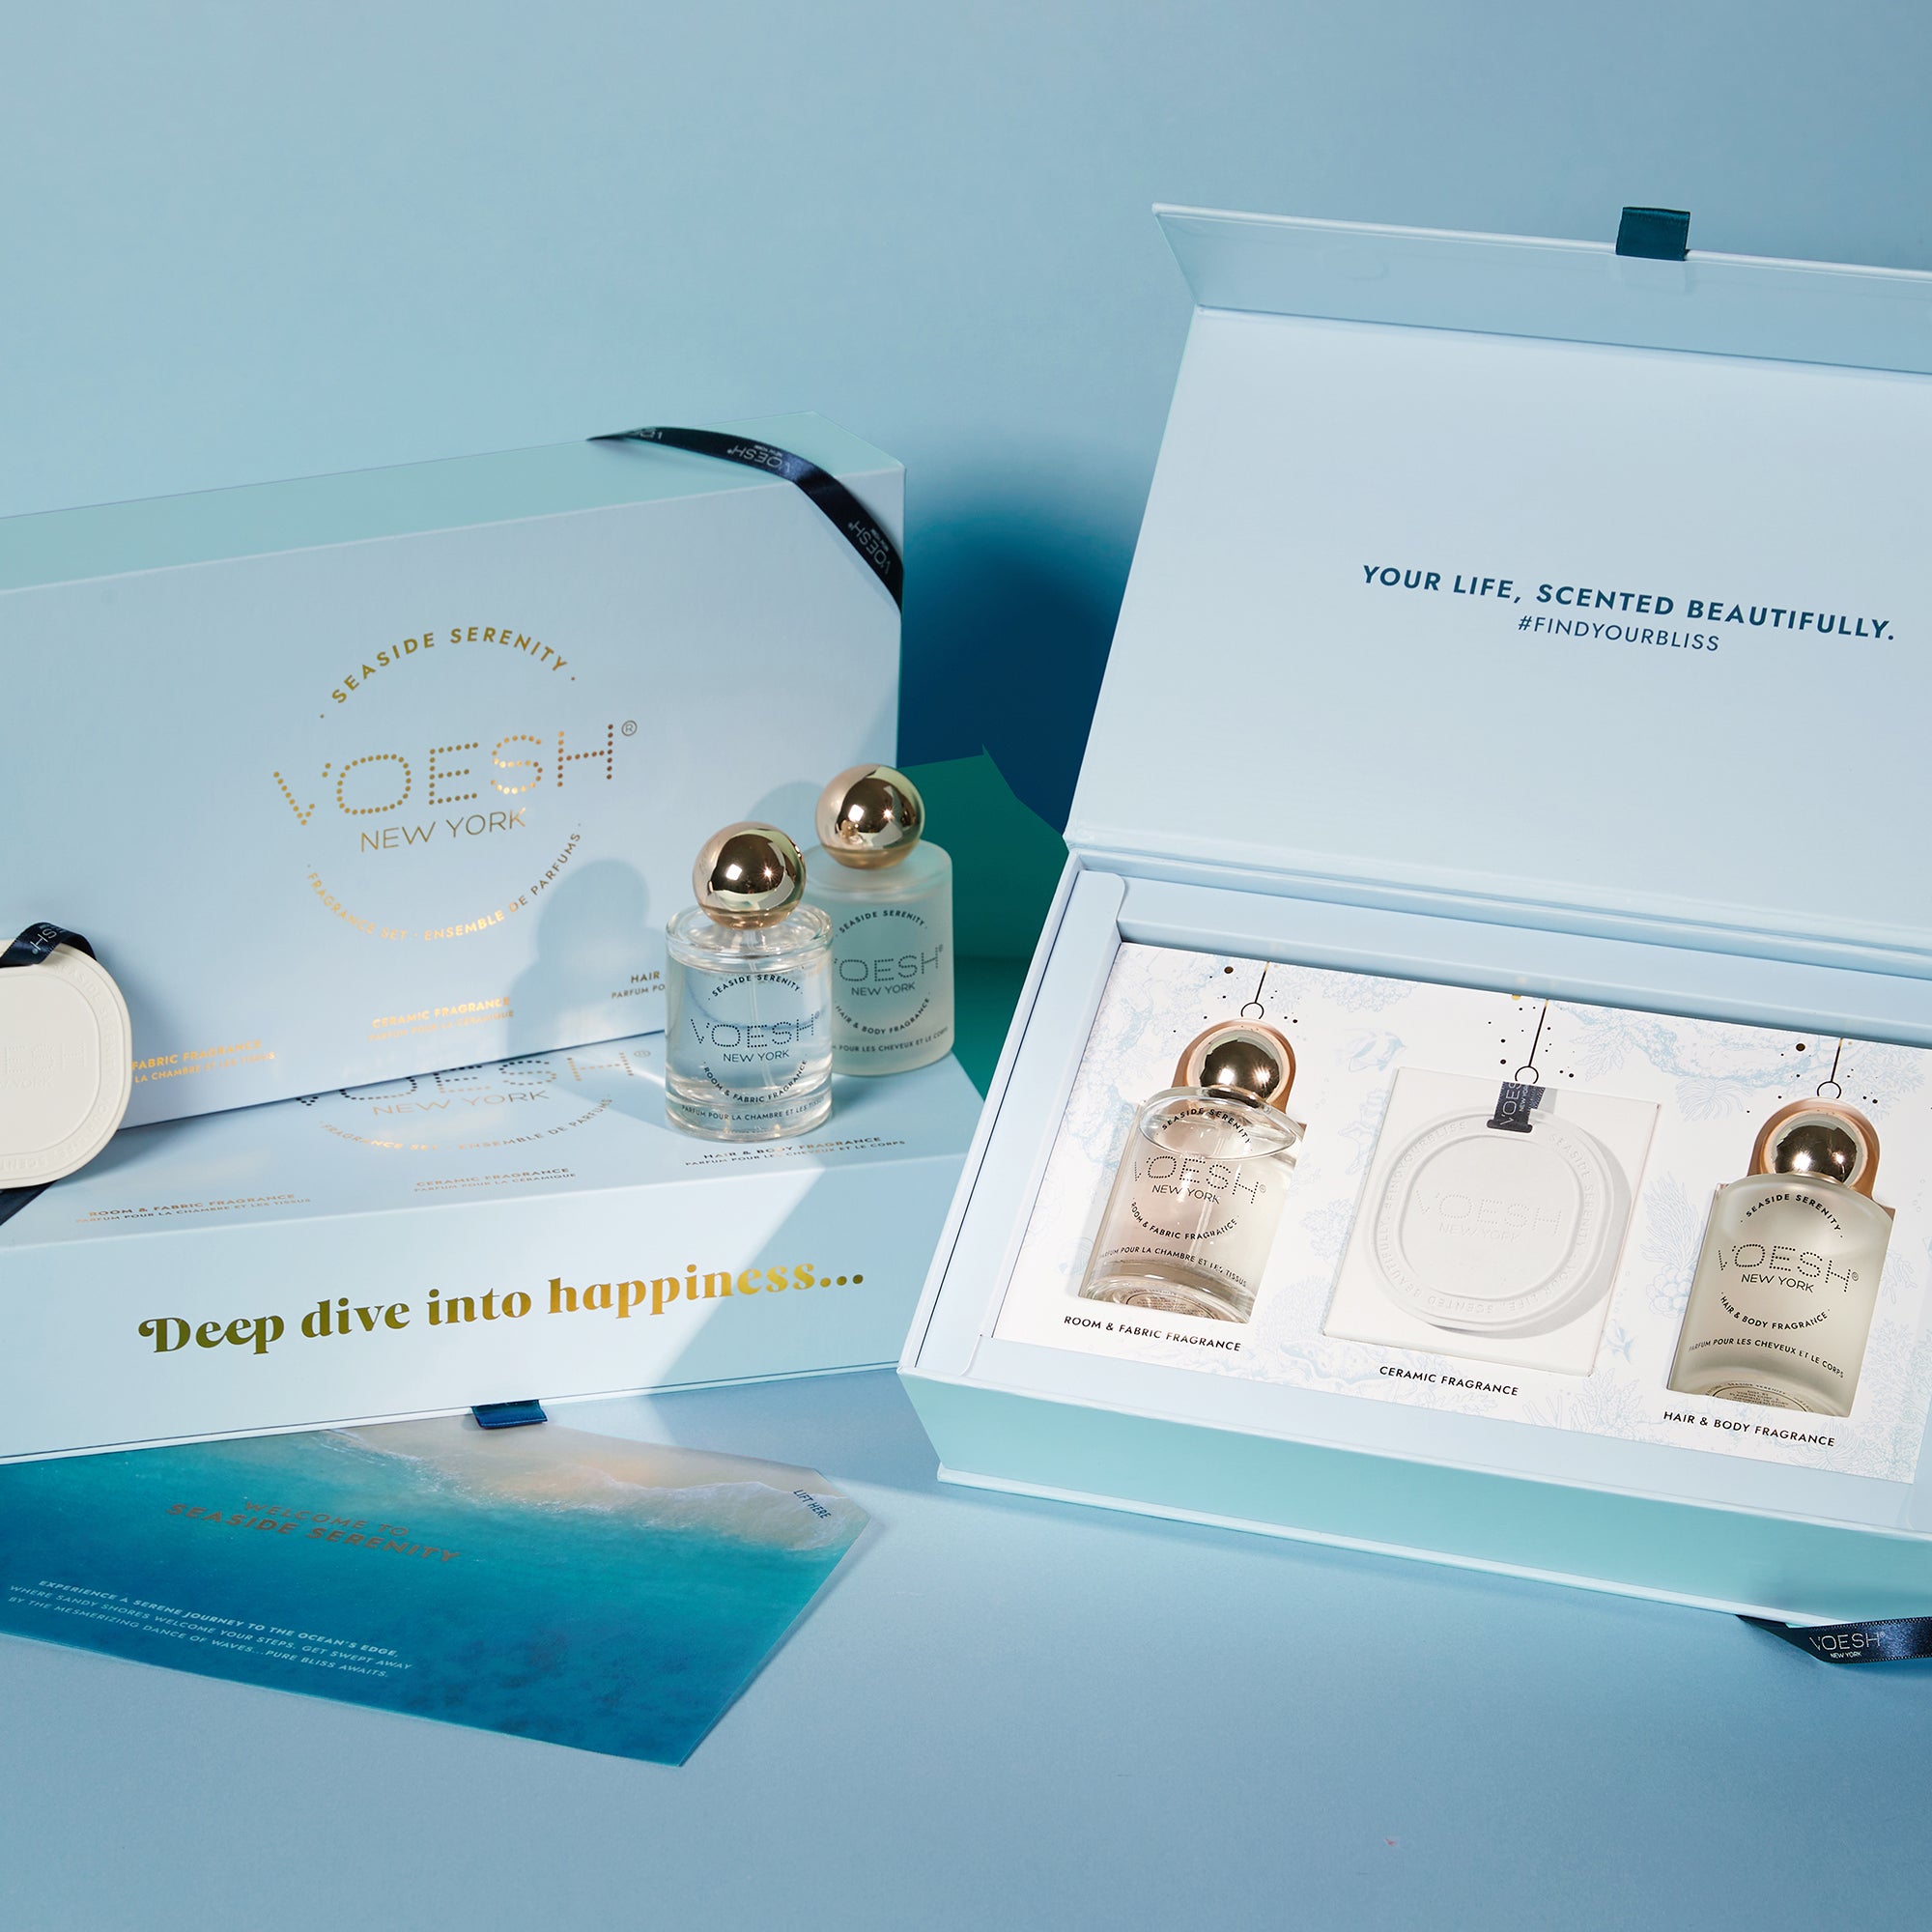 Three Seaside Serenity Fragrance Set boxes, one open and two closed, on a blue background.